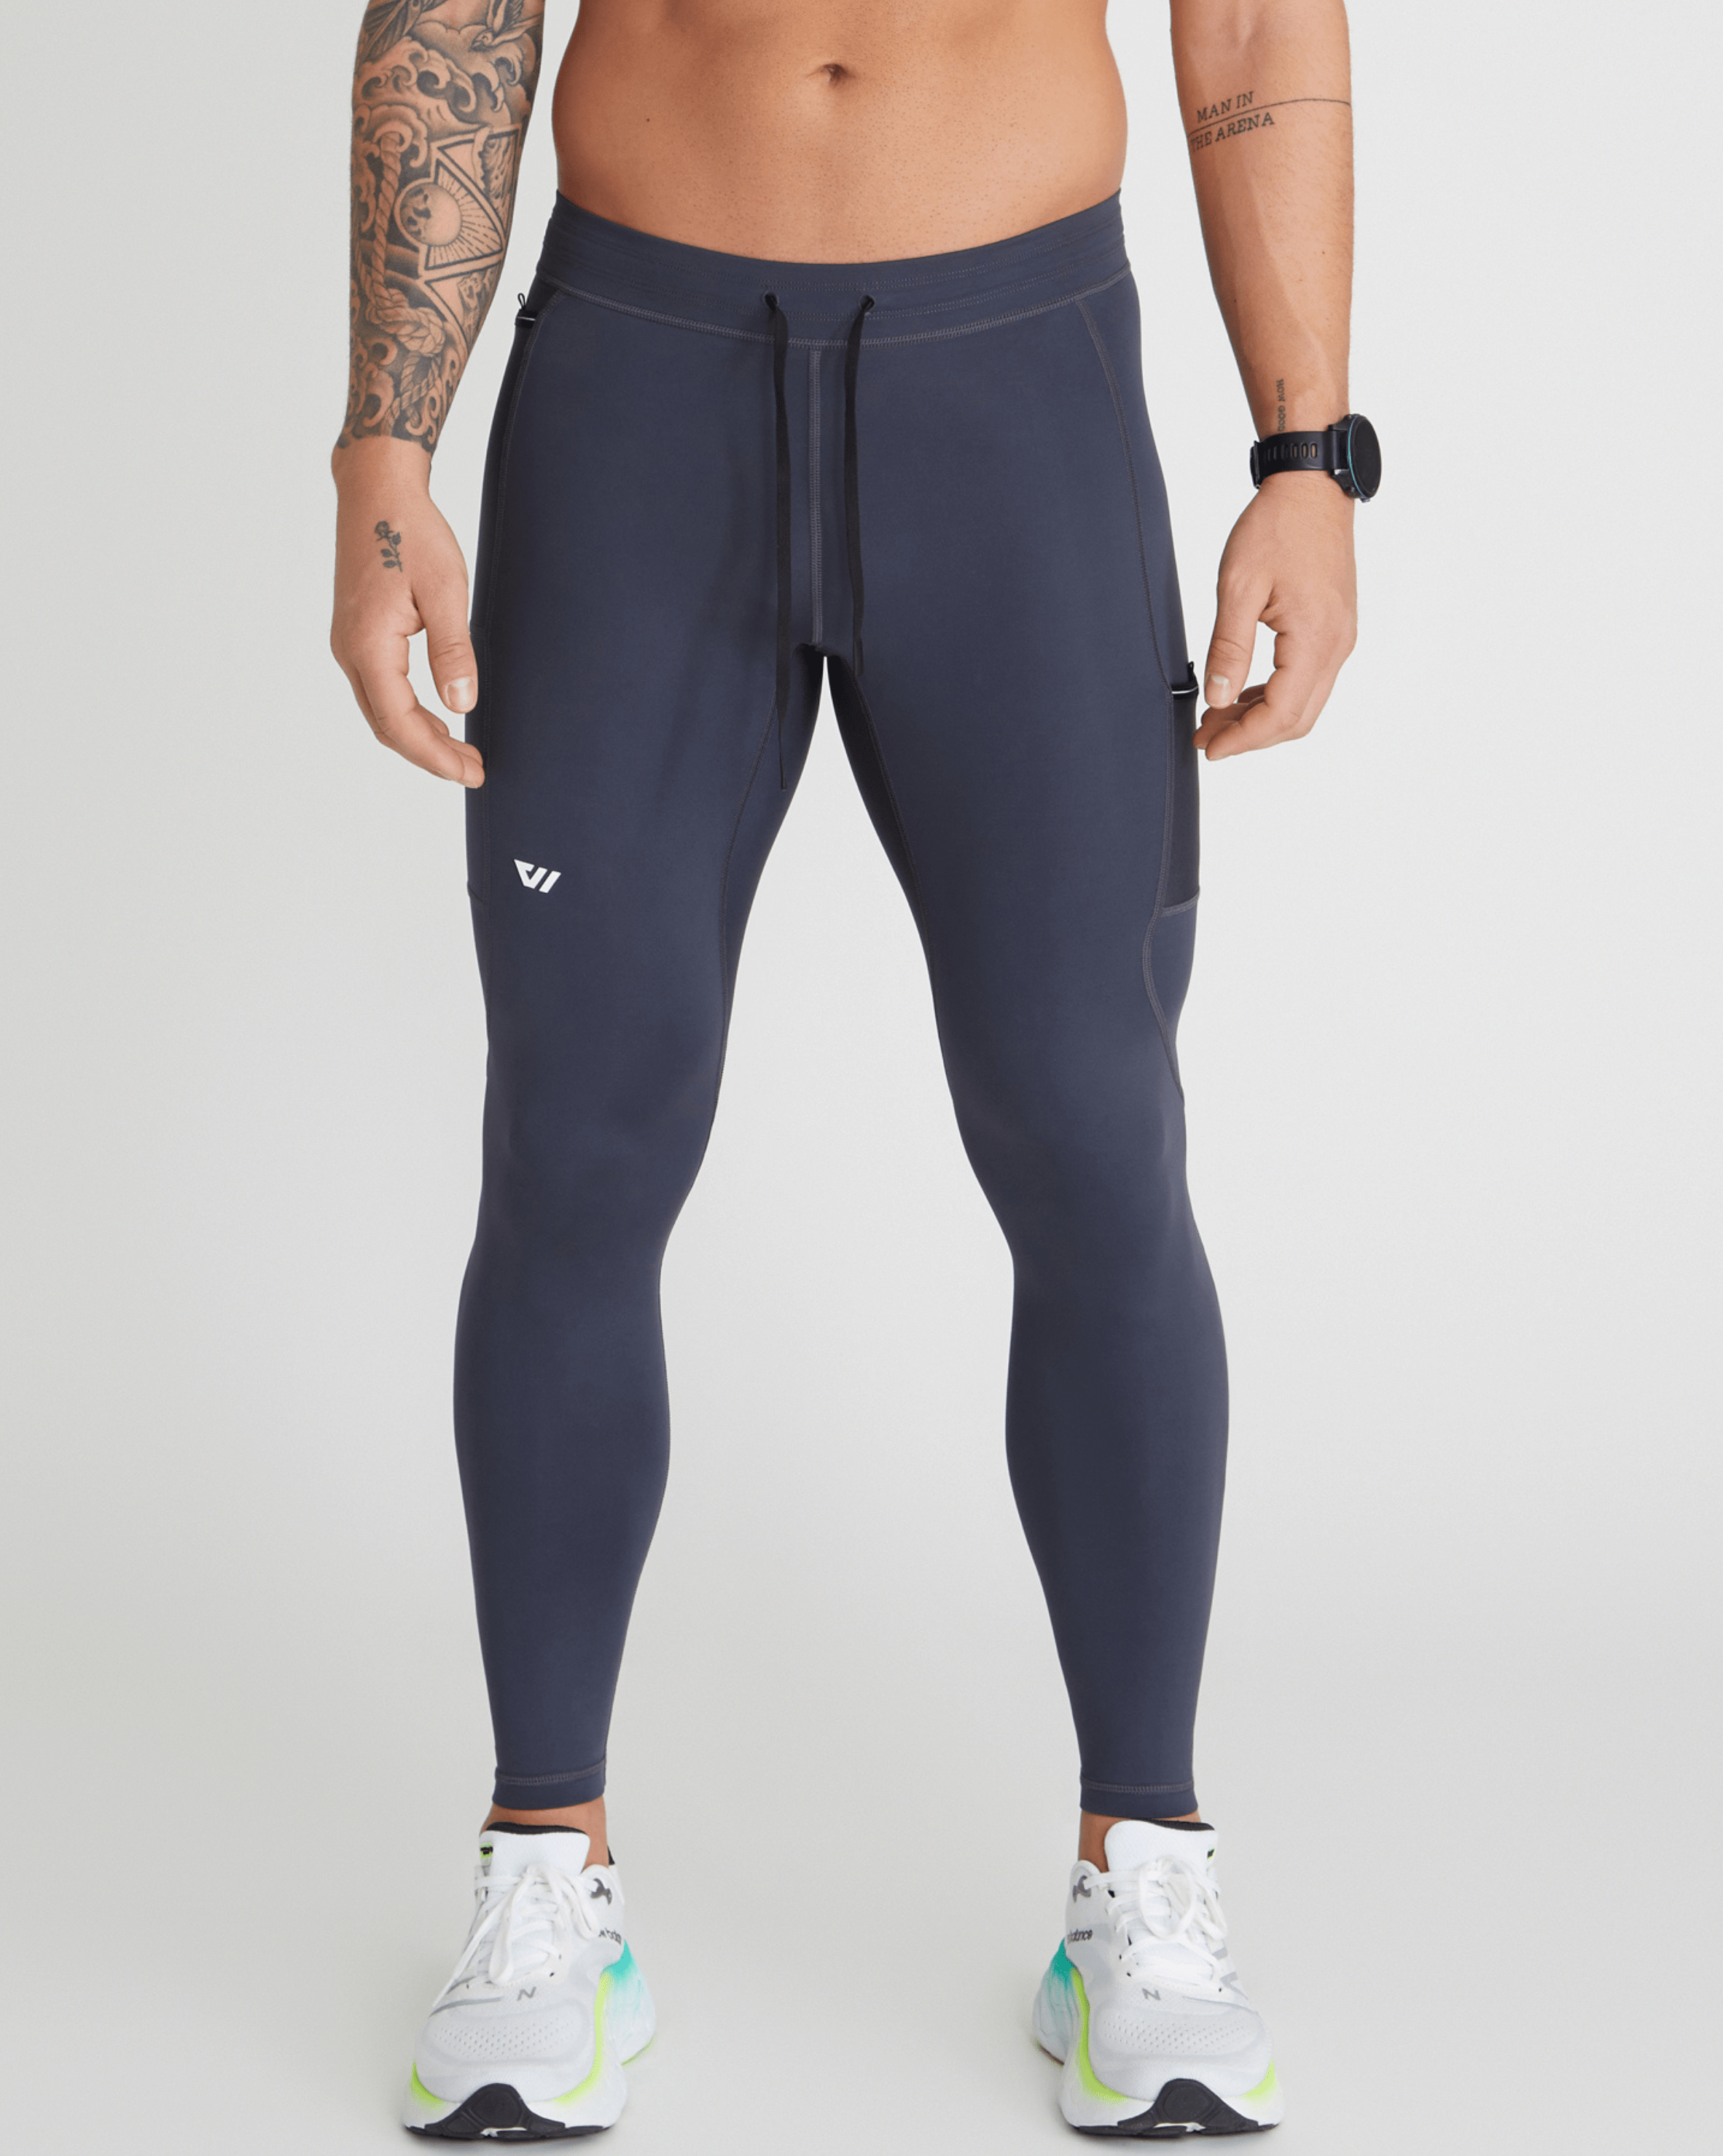 Distance Full Tight in Hudson Grey – WOLACO